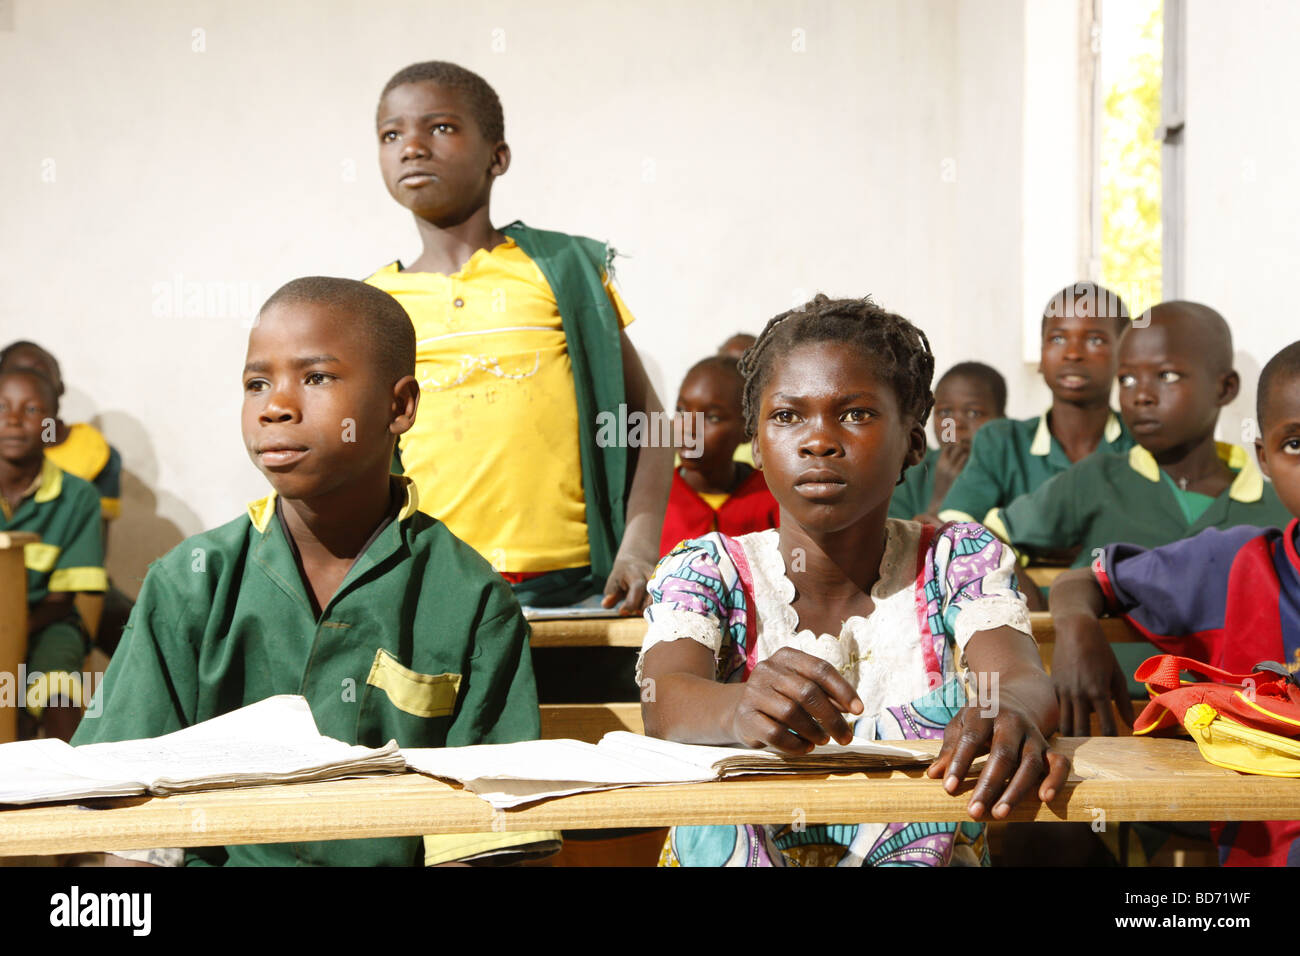 Girl without uniforms with classmates in uniform, during lessons, Mora, Cameroon, Africa Stock Photo